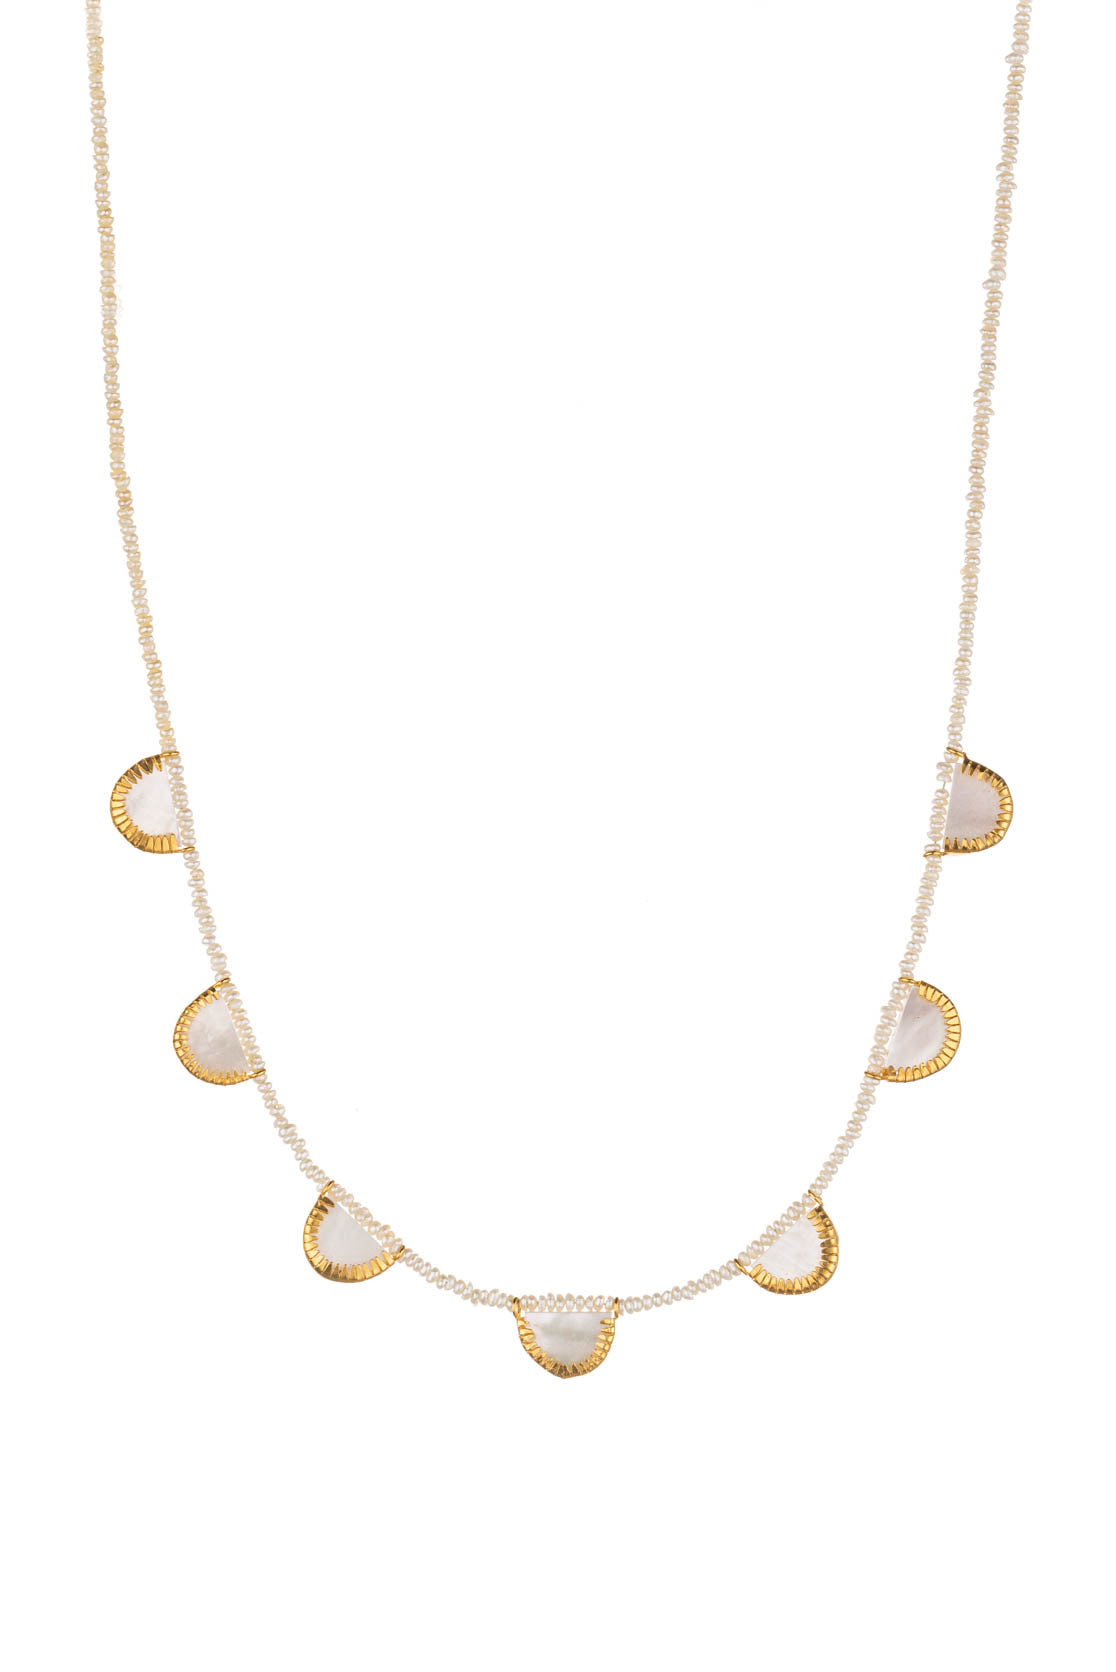 Egyptian Deco Mother Of Pearl Necklace With Freshwater Pearls